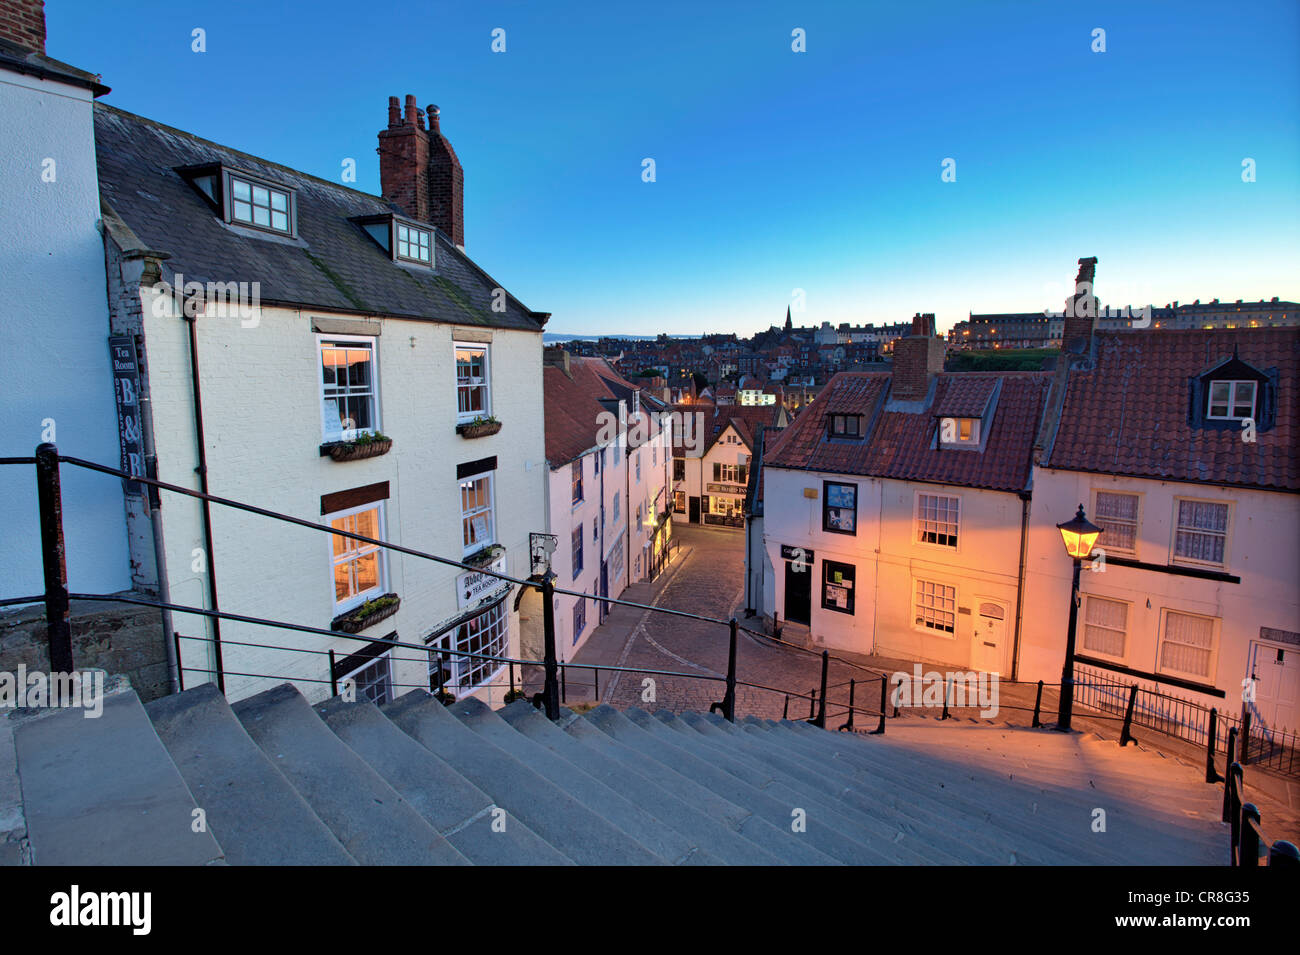 Whitby 199 steps at night/evening, North Yorkshire Stock Photo